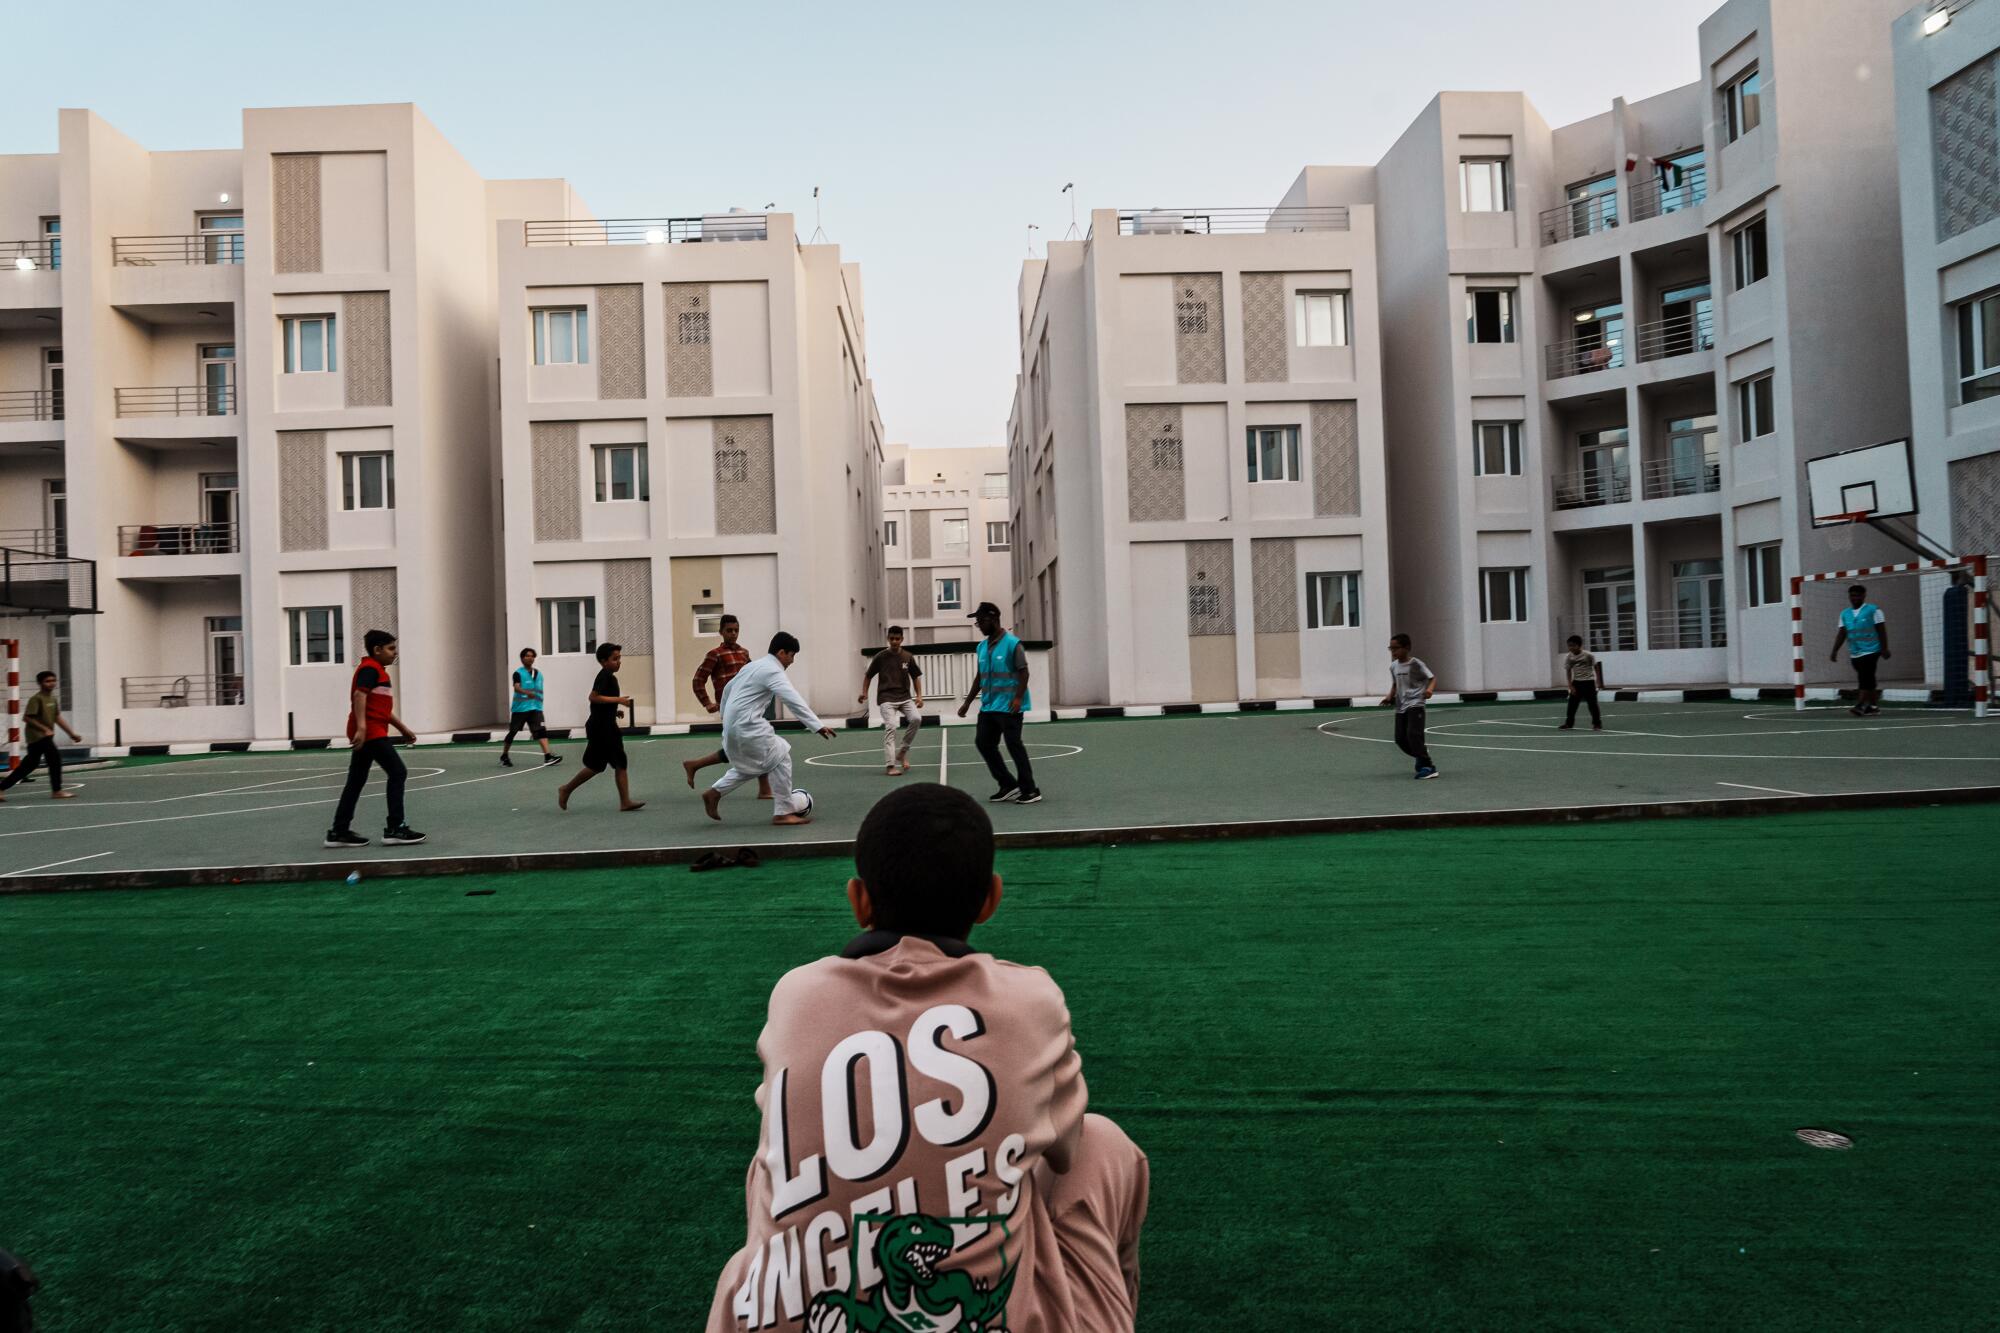 A boy wearing a T-Shirt that reads "Los Angeles" watches people playing soccer near buildings